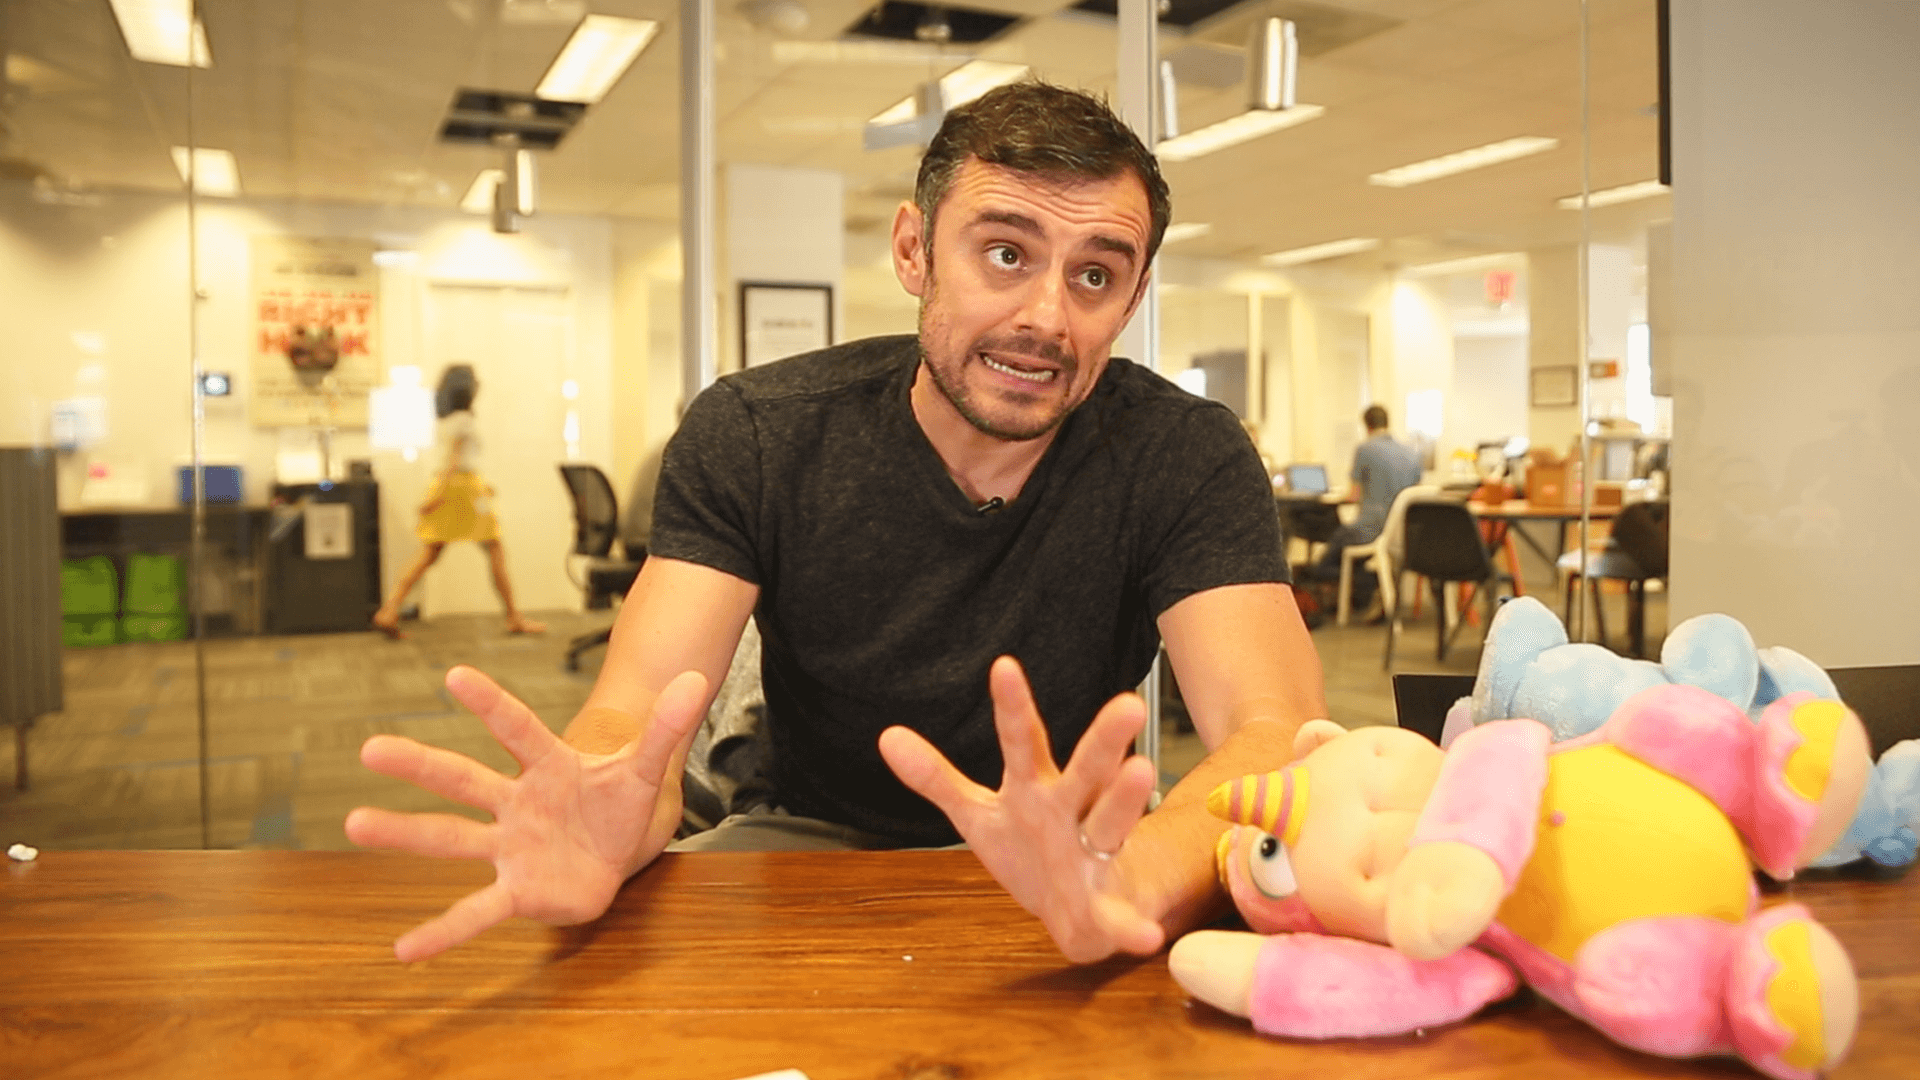 #AskGaryVee Episode 129: The Share Monster